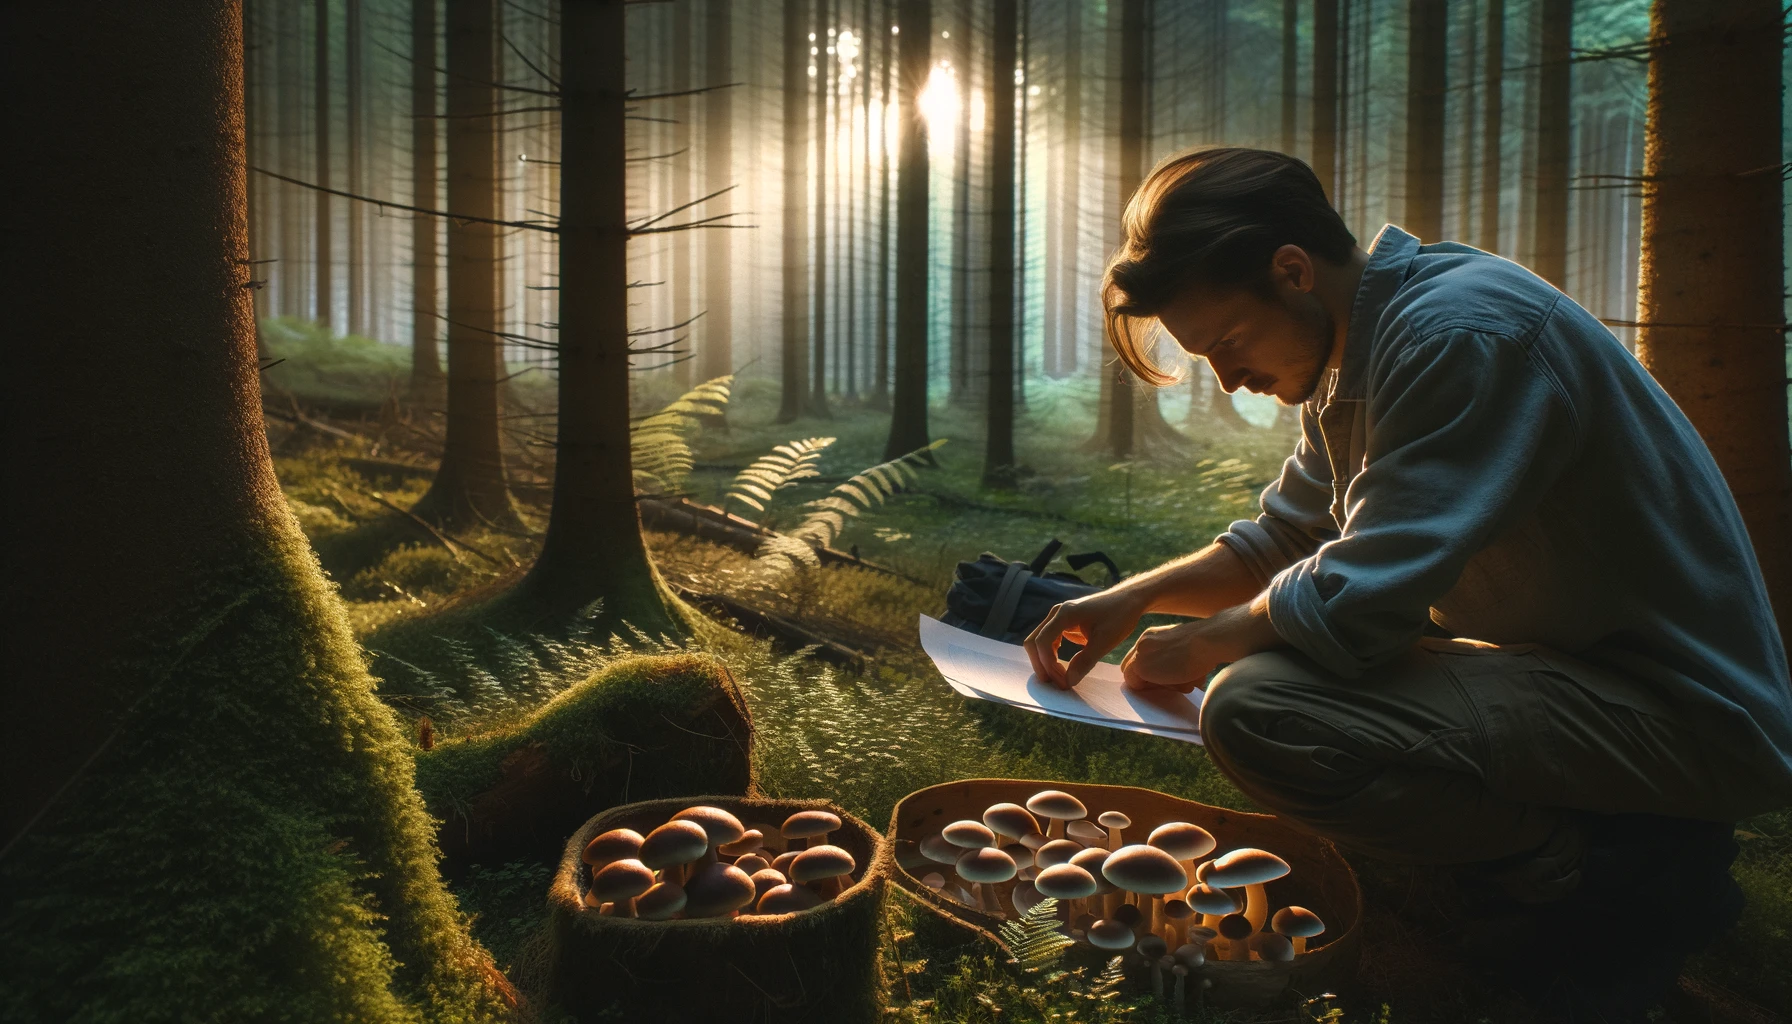 Person collecting mushroom spores in a forest at dawn, showcasing a connection with nature.